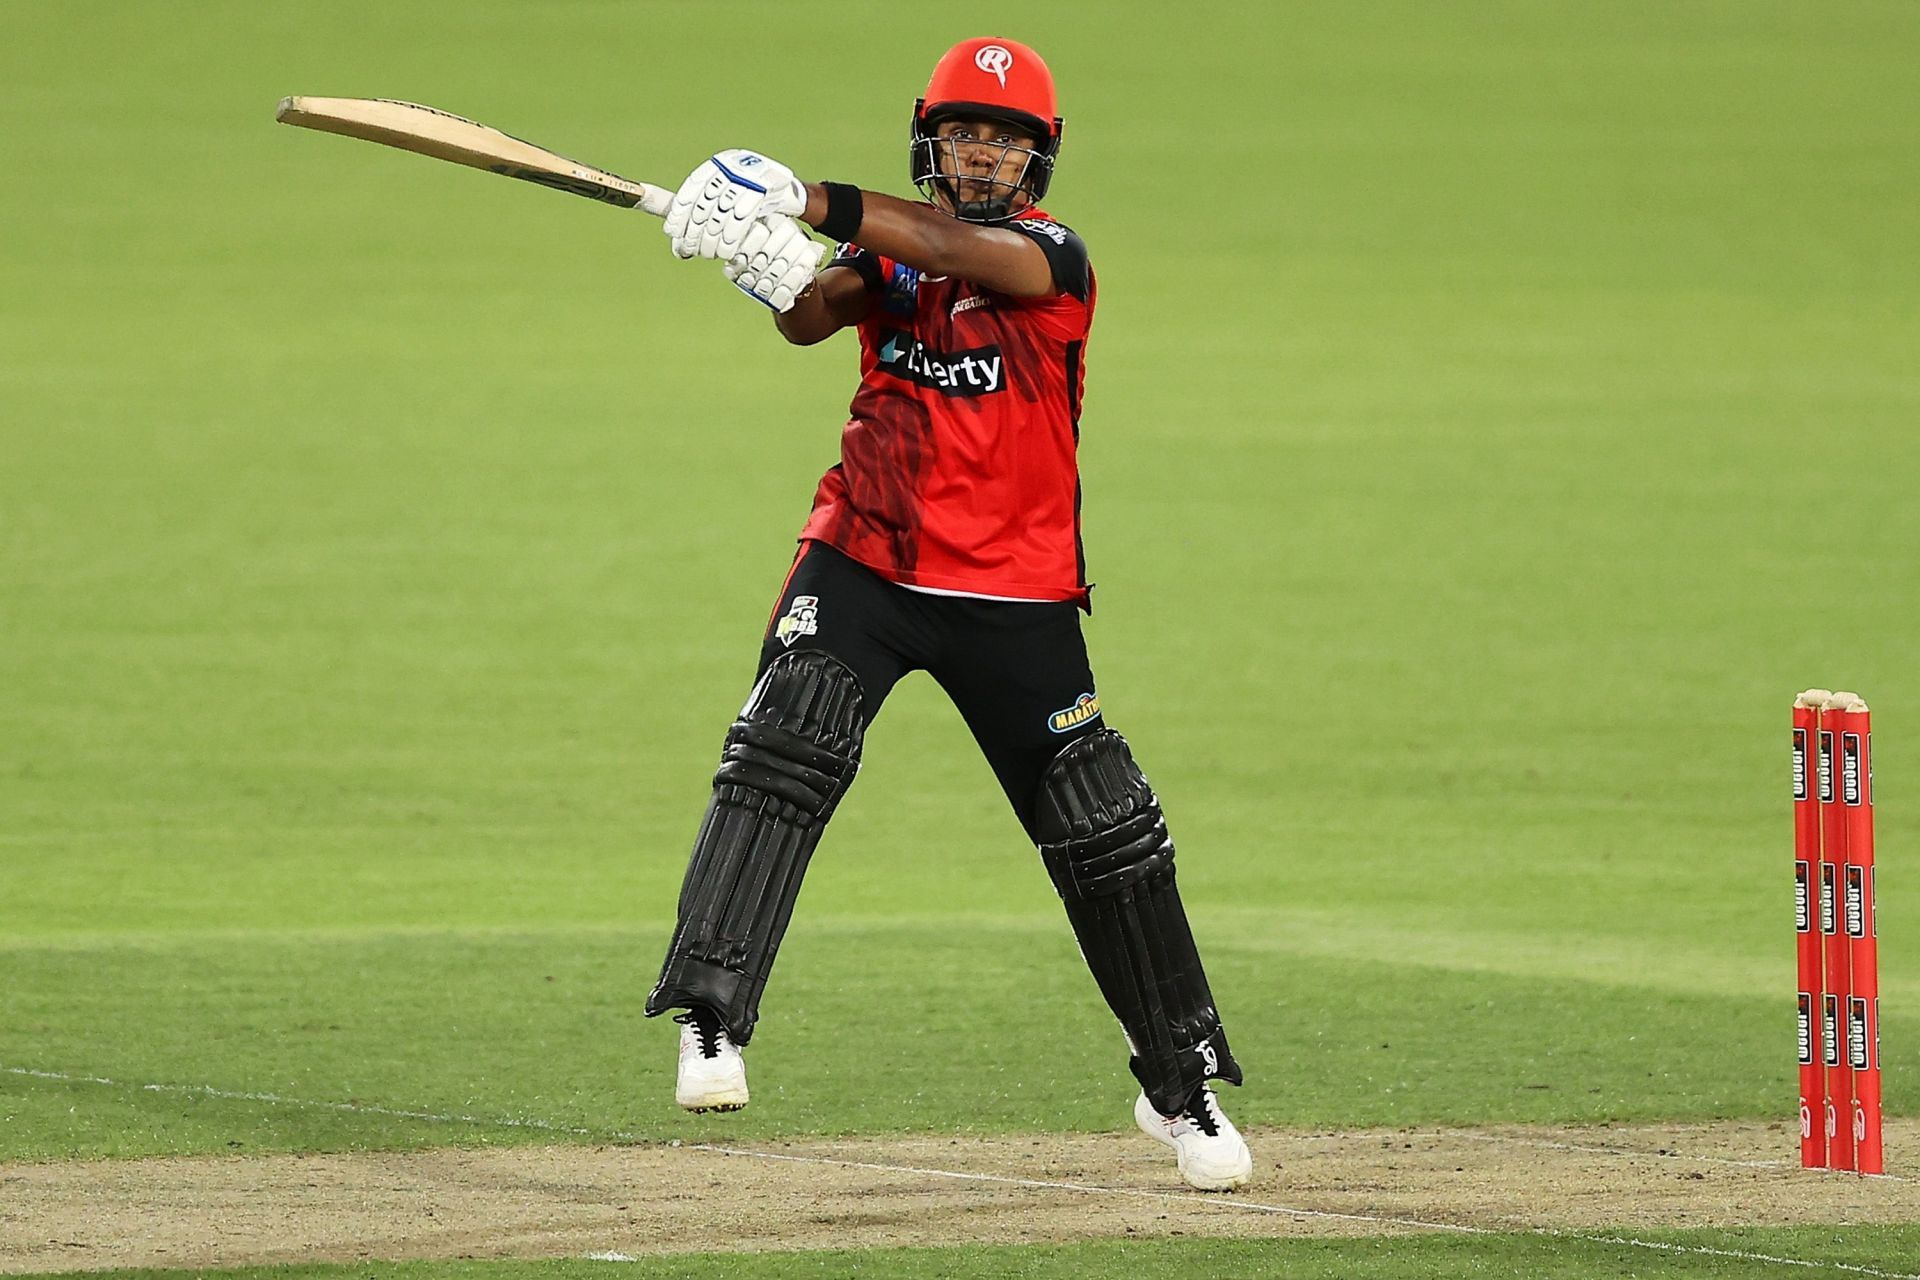 Chamari Athapaththu in the WBBL. Pic: Getty Images